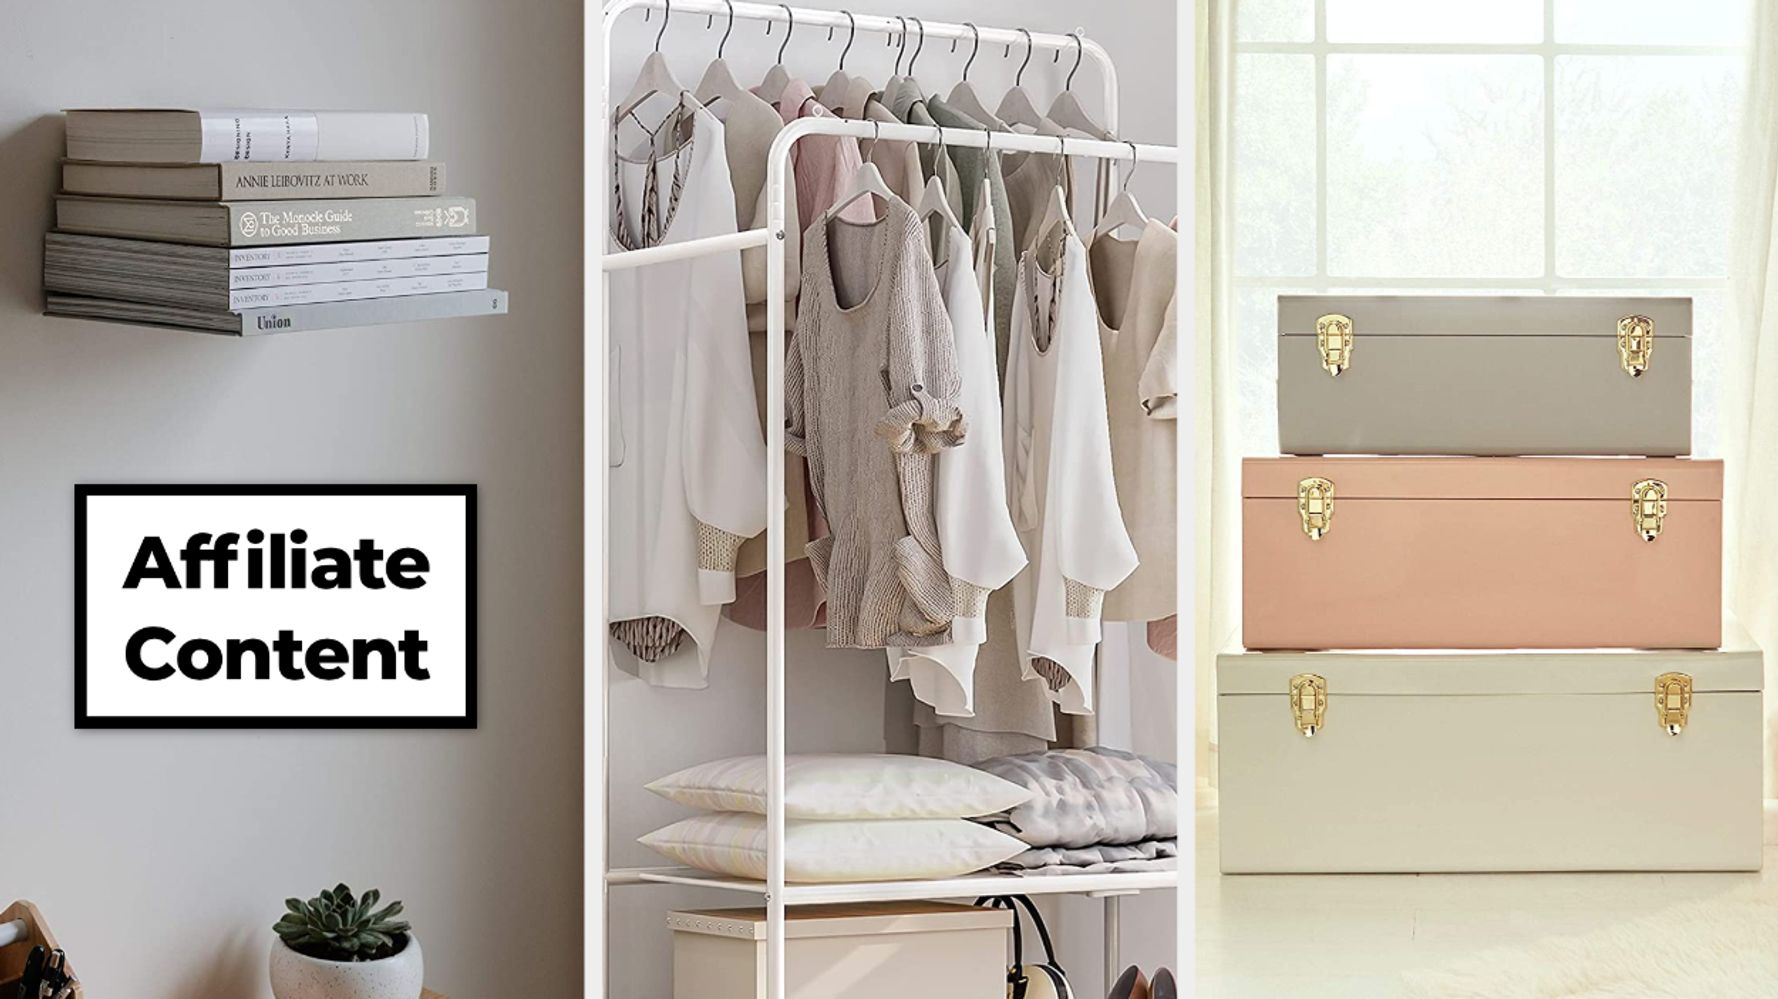 18 Space Saving Bedroom Storage Solutions If You Live In A Teeny ...